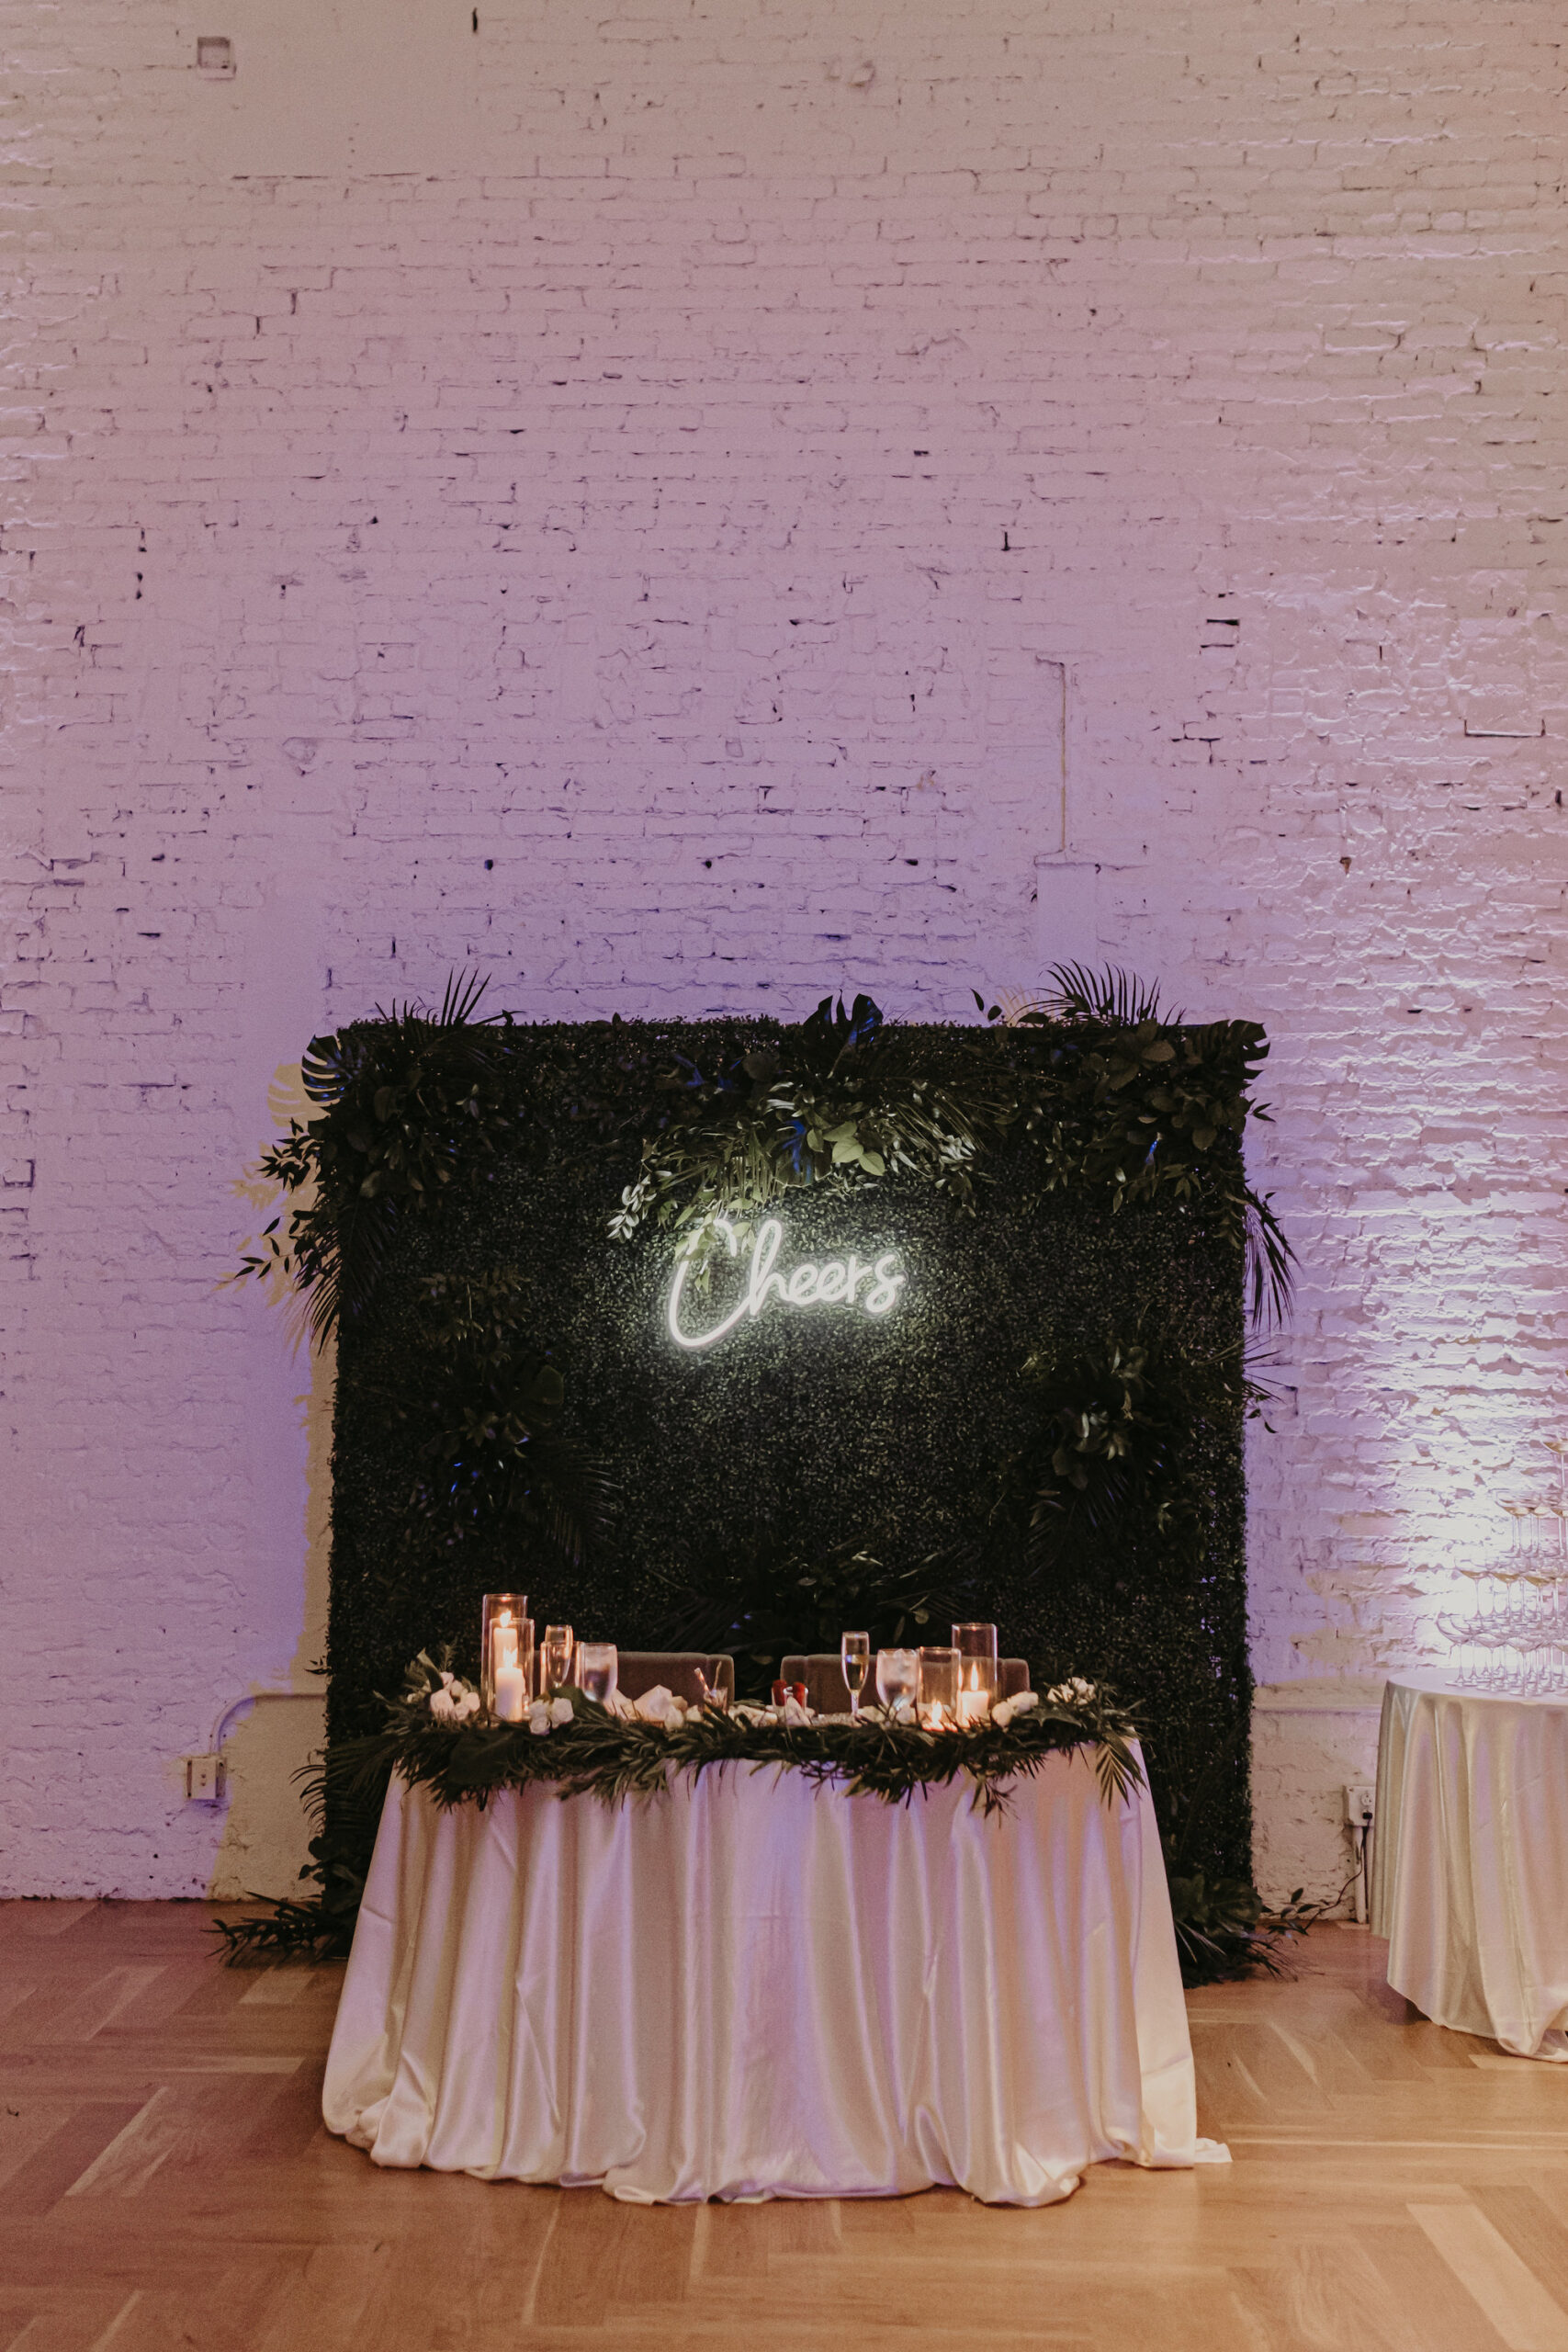 Tropical Greenery Wall Backdrop | Sweetheart Candlelit Head Wedding Reception Table Inspiration with Neon Cheers Sign